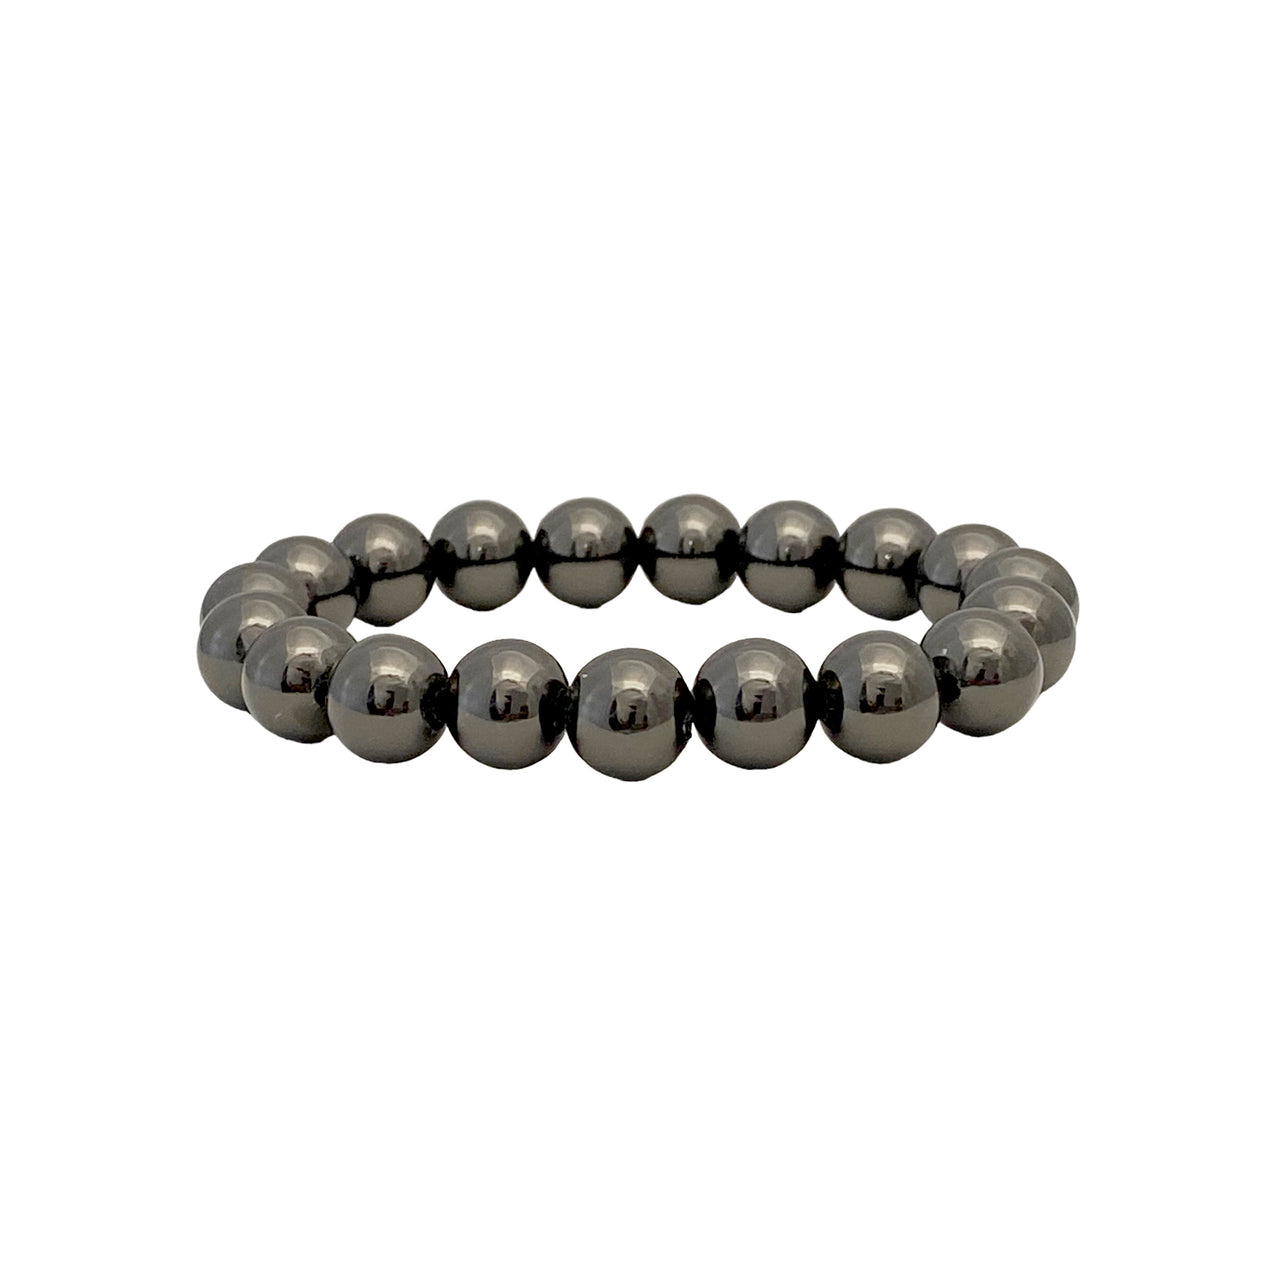 The Famous 10mm Beaded Stretch Bracelet